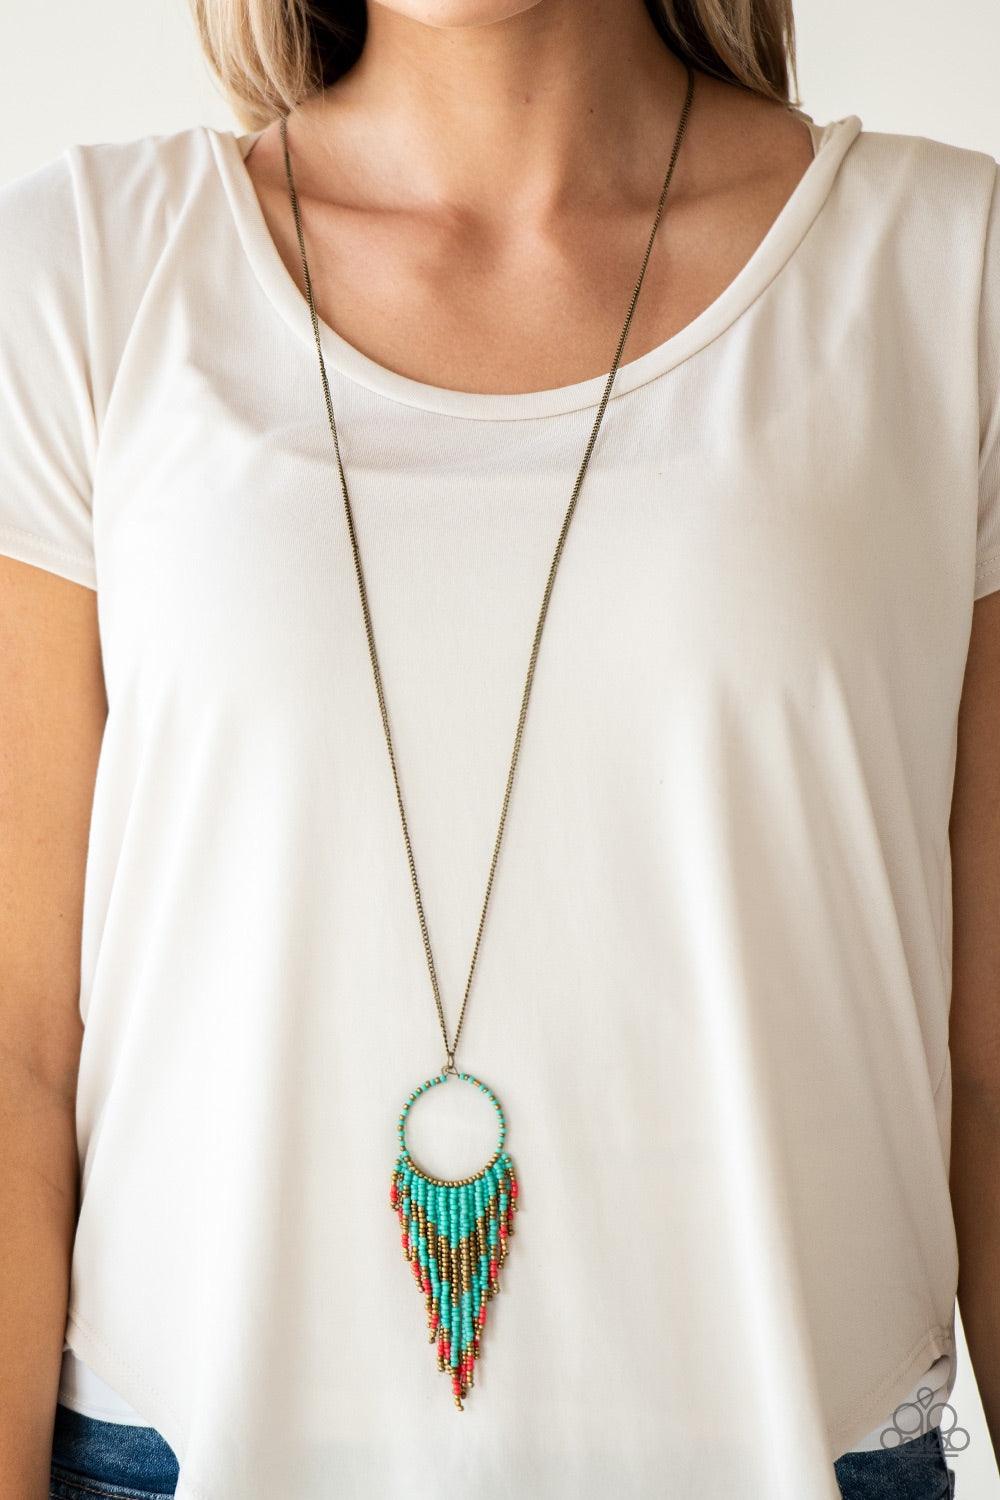 Paparazzi Accessories Badlands Beauty - Blue Infused with blue, brass, and red seed beads, a colorful dream catcher like pendant swings from the bottom of a lengthened brass chain for a tribal inspired look. Features an adjustable clasp closure. Jewelry